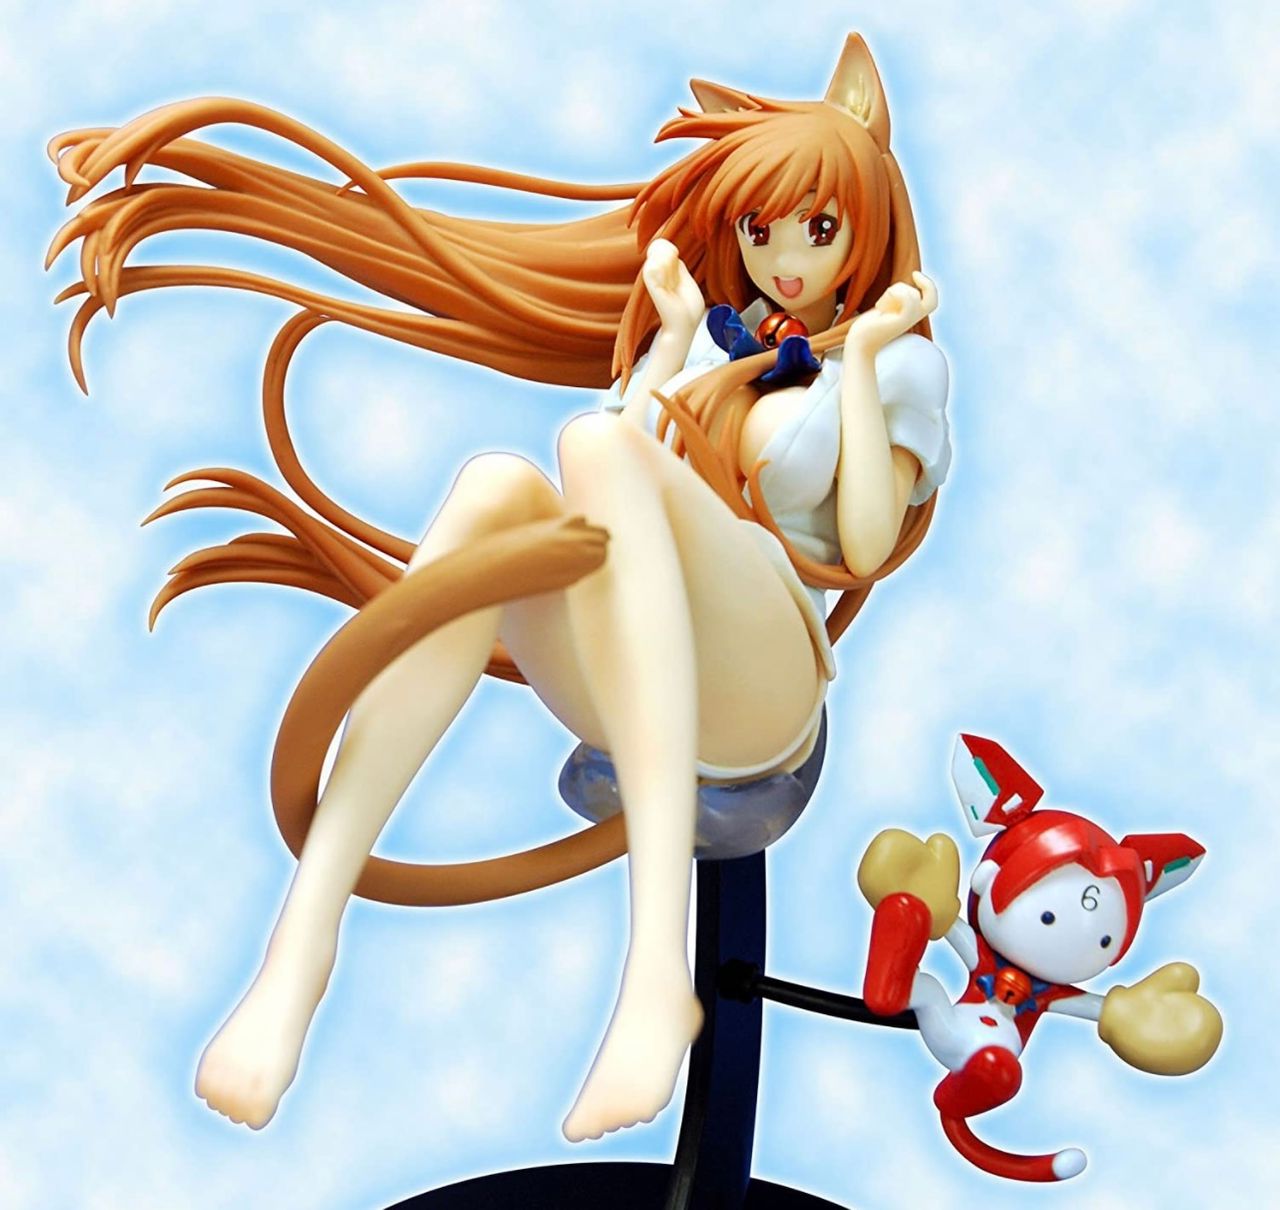 This is an offer made on the Request: Eris (Cat Planet Cuties Figures or Ga...